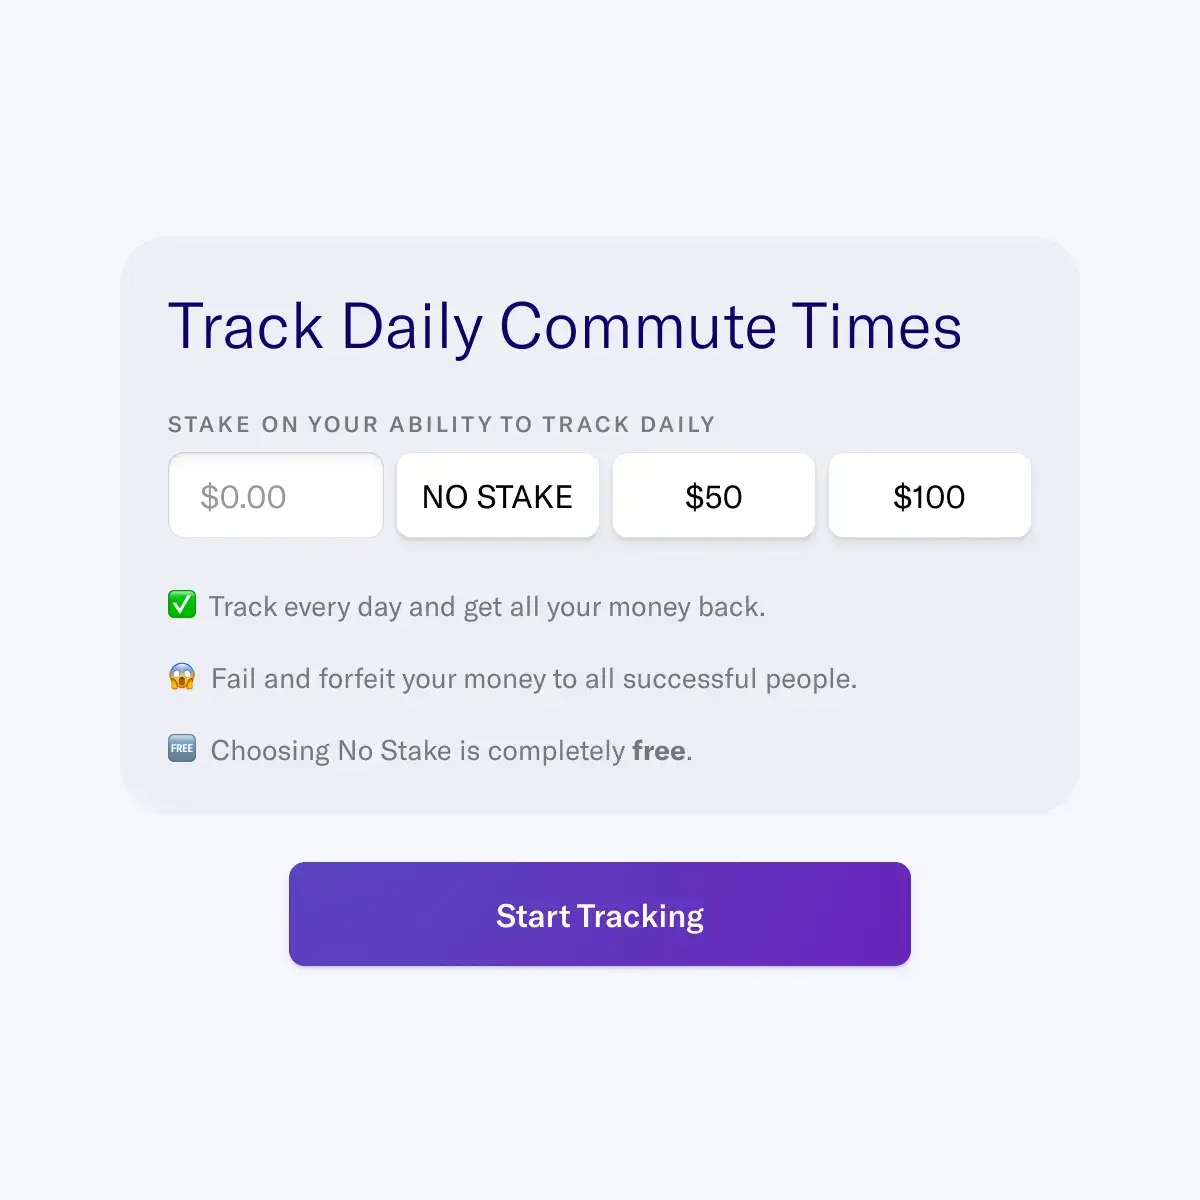 Pledge on your ability to follow through with tracking so you have extra incentive to log your activities each day - alternatively use free and receive all the same features